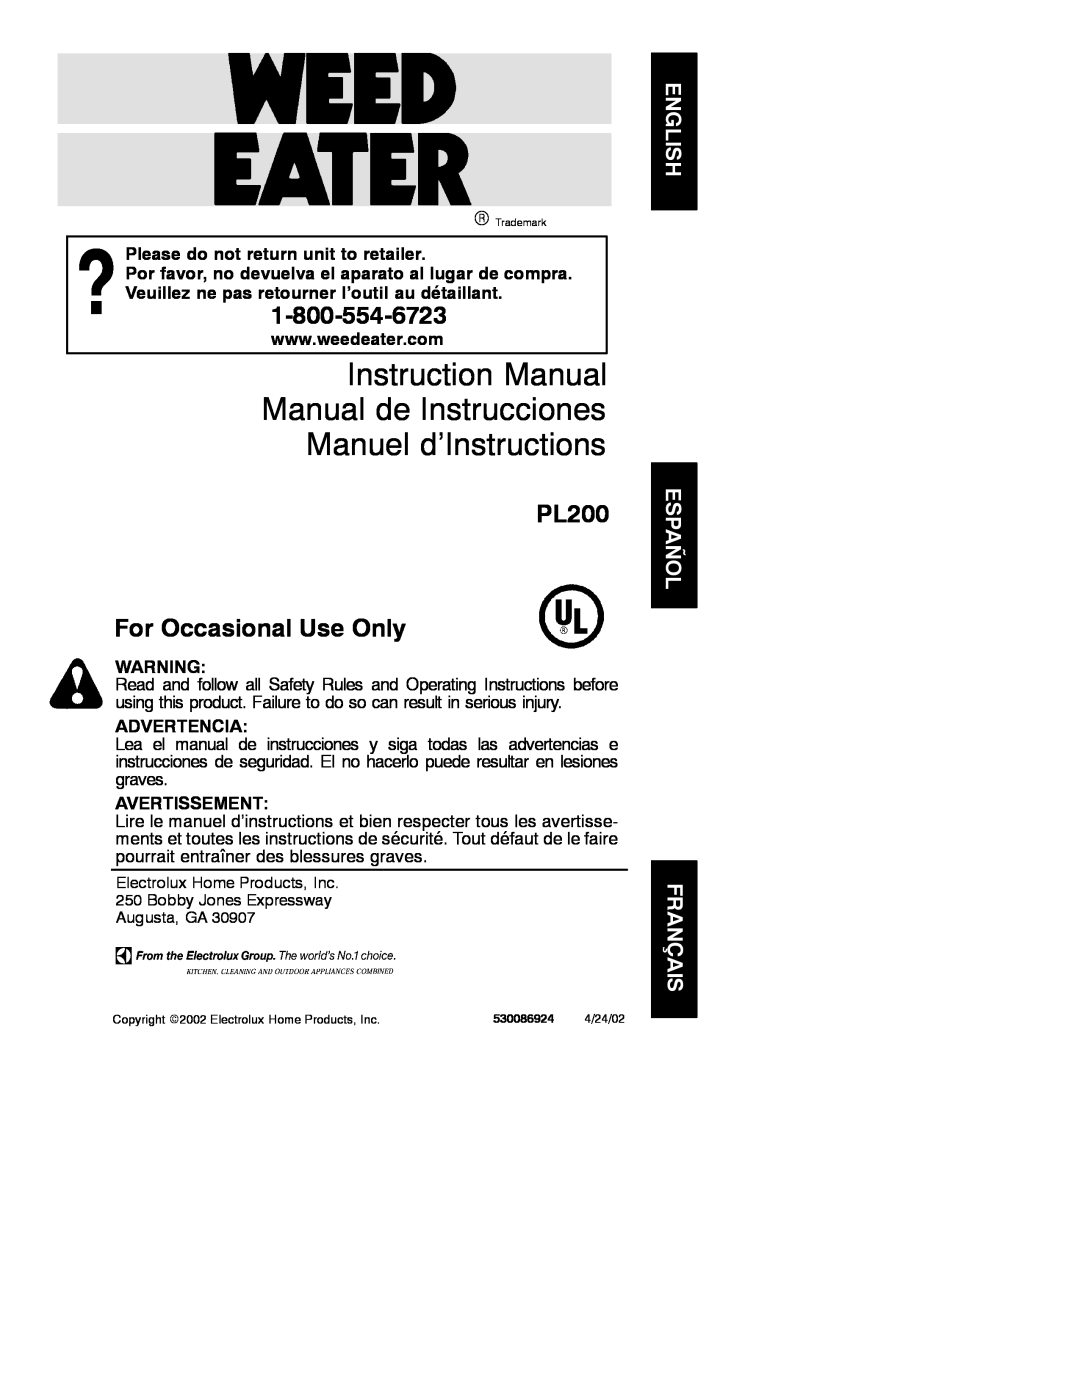 Weed Eater 530086924 instruction manual Please do not return unit to retailer, Advertencia, Avertissement 